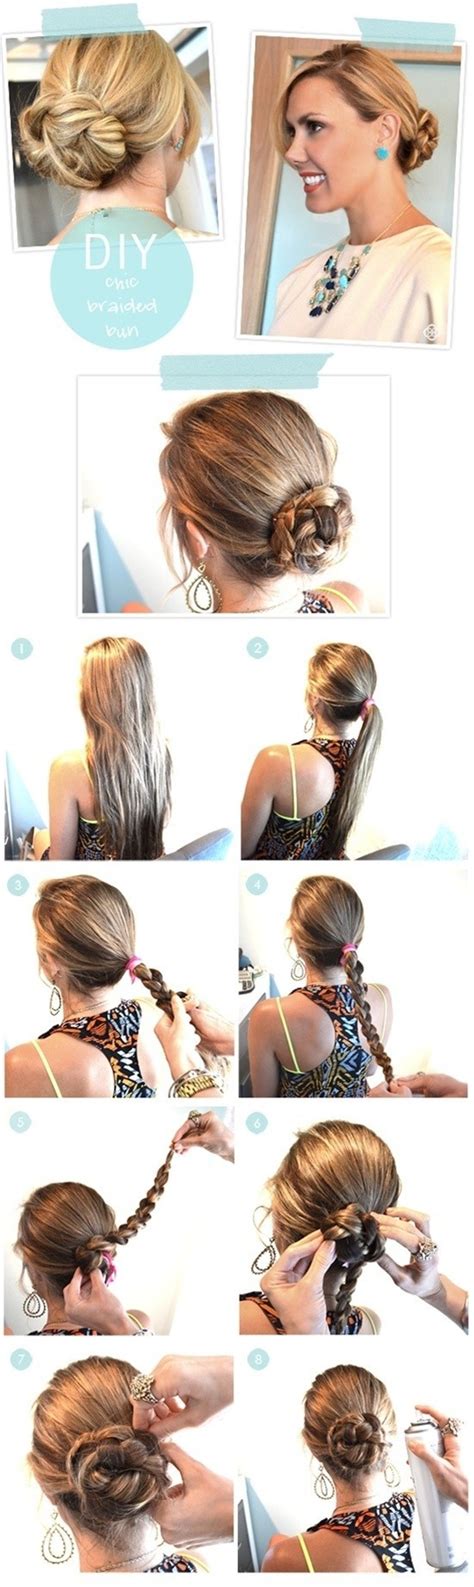 12 beautiful & fashionable step by step hairstyle tutorials | styles … easy hairstyles for short hair to do at home easy hairstyles for … 10 tips for easy diy updos for short hair | Hair Style and ...